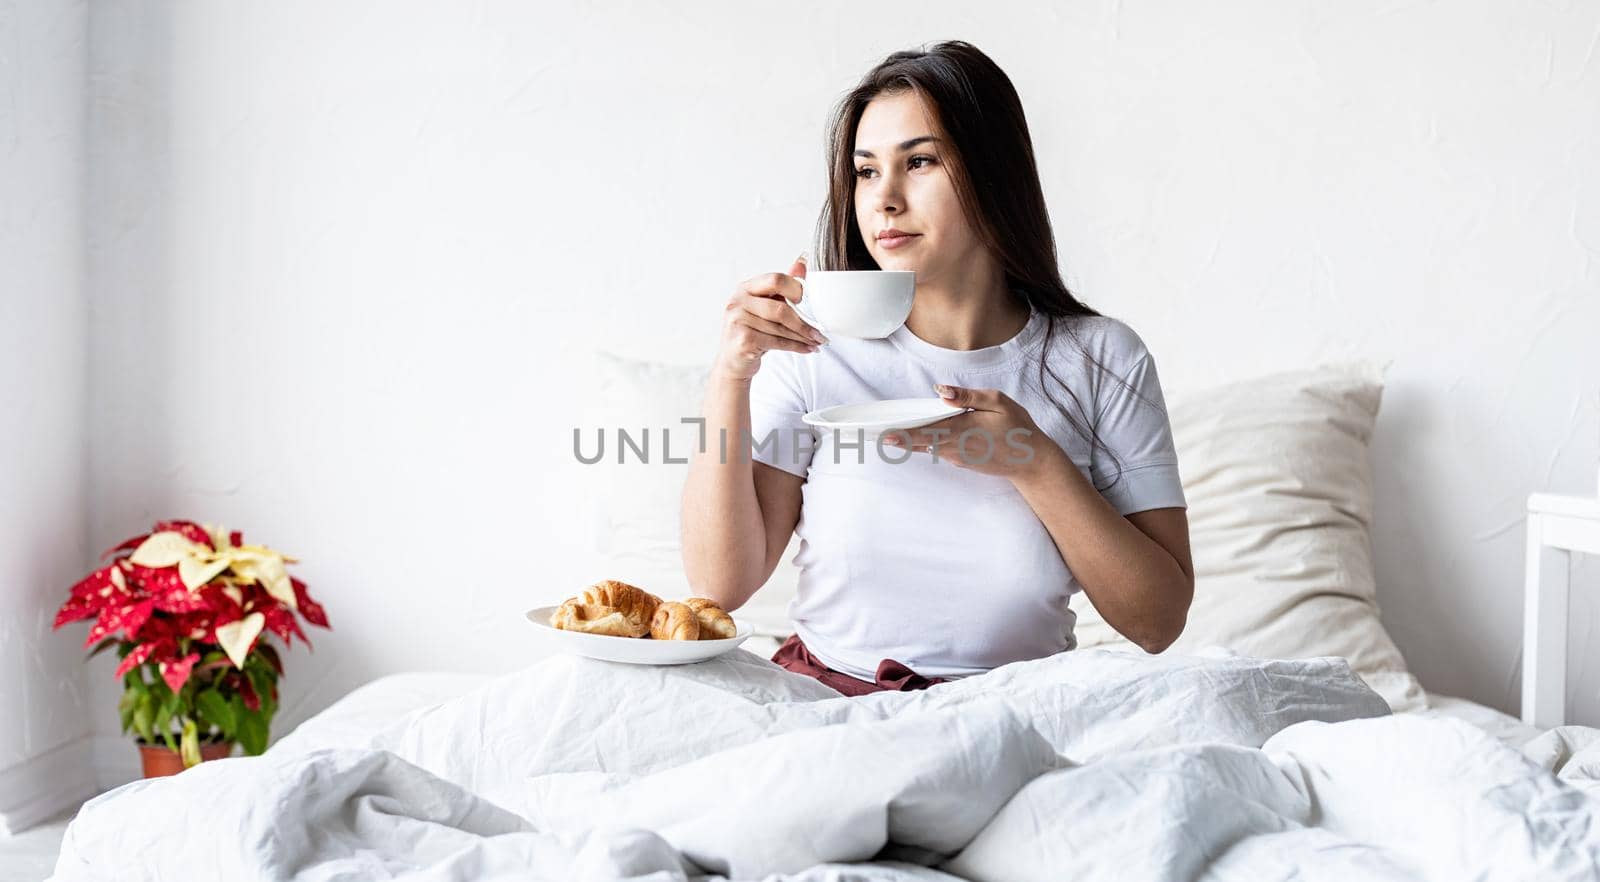 Valentines Day. Young brunette woman sitting awake in the bed with red heart shaped balloons and decorations drinking coffee eating croissants